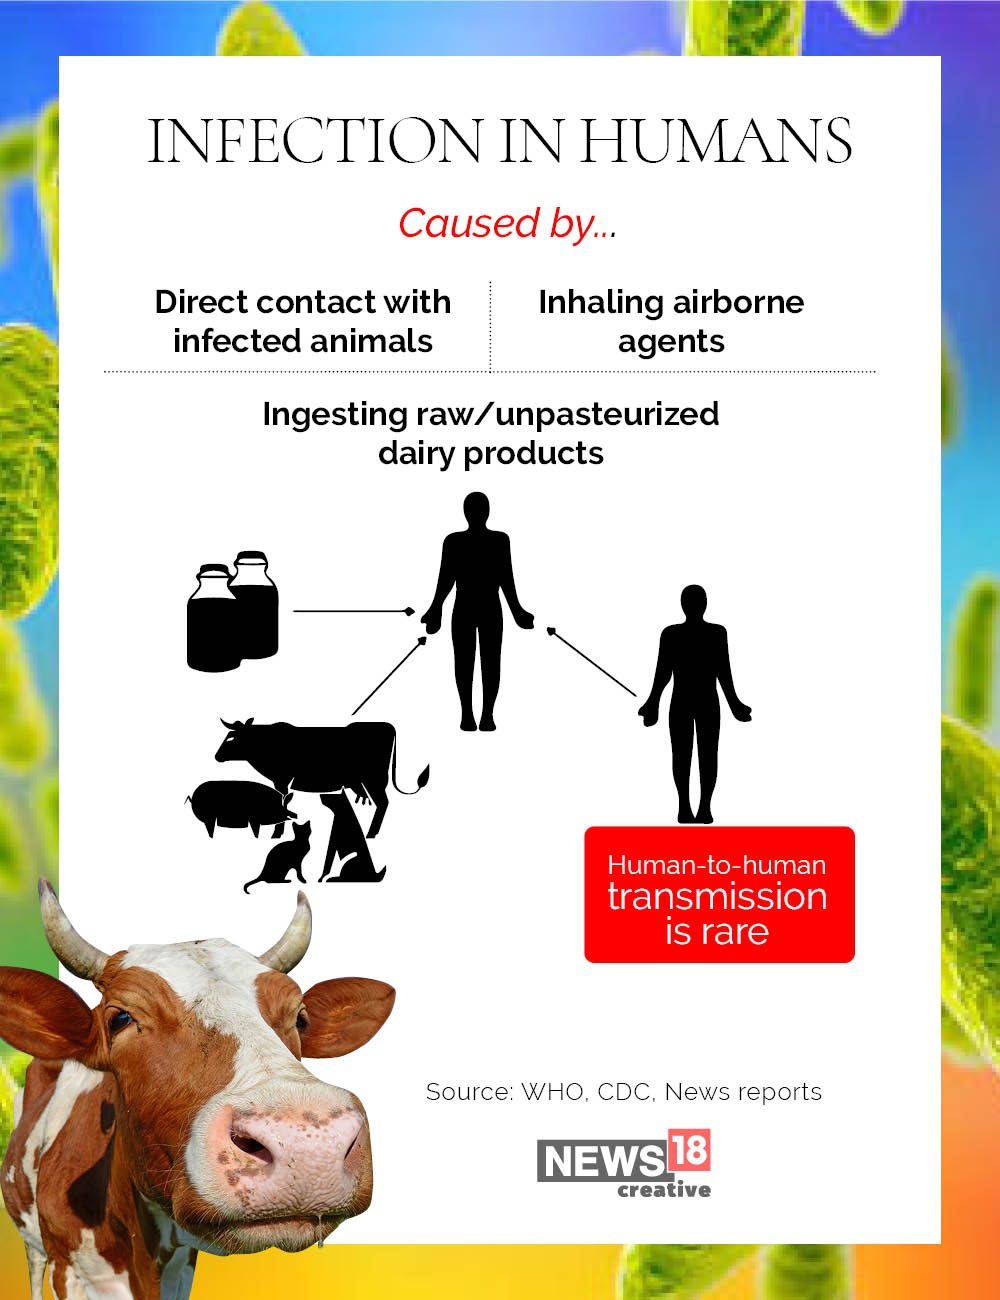 Brucellosis outbreak in China: What you need to know